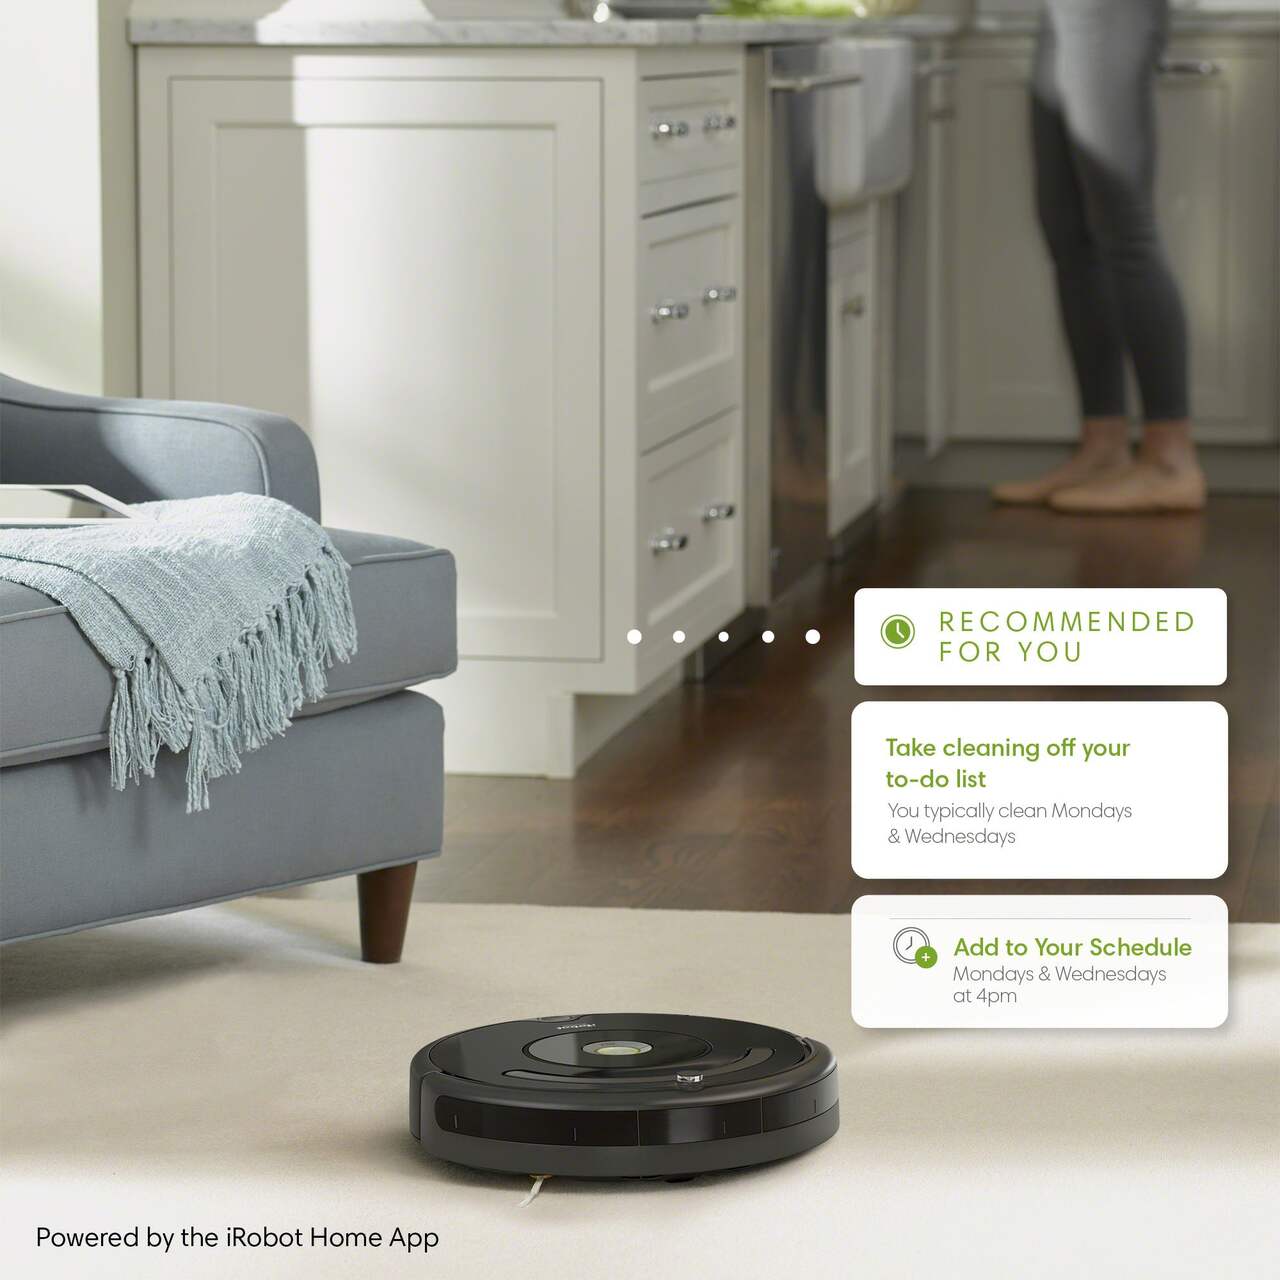  iRobot Roomba 676 Robot Vacuum-Wi-Fi Connectivity, Compatible  with Alexa, Good for Pet Hair, Carpets, Hard Floors, Self-Charging